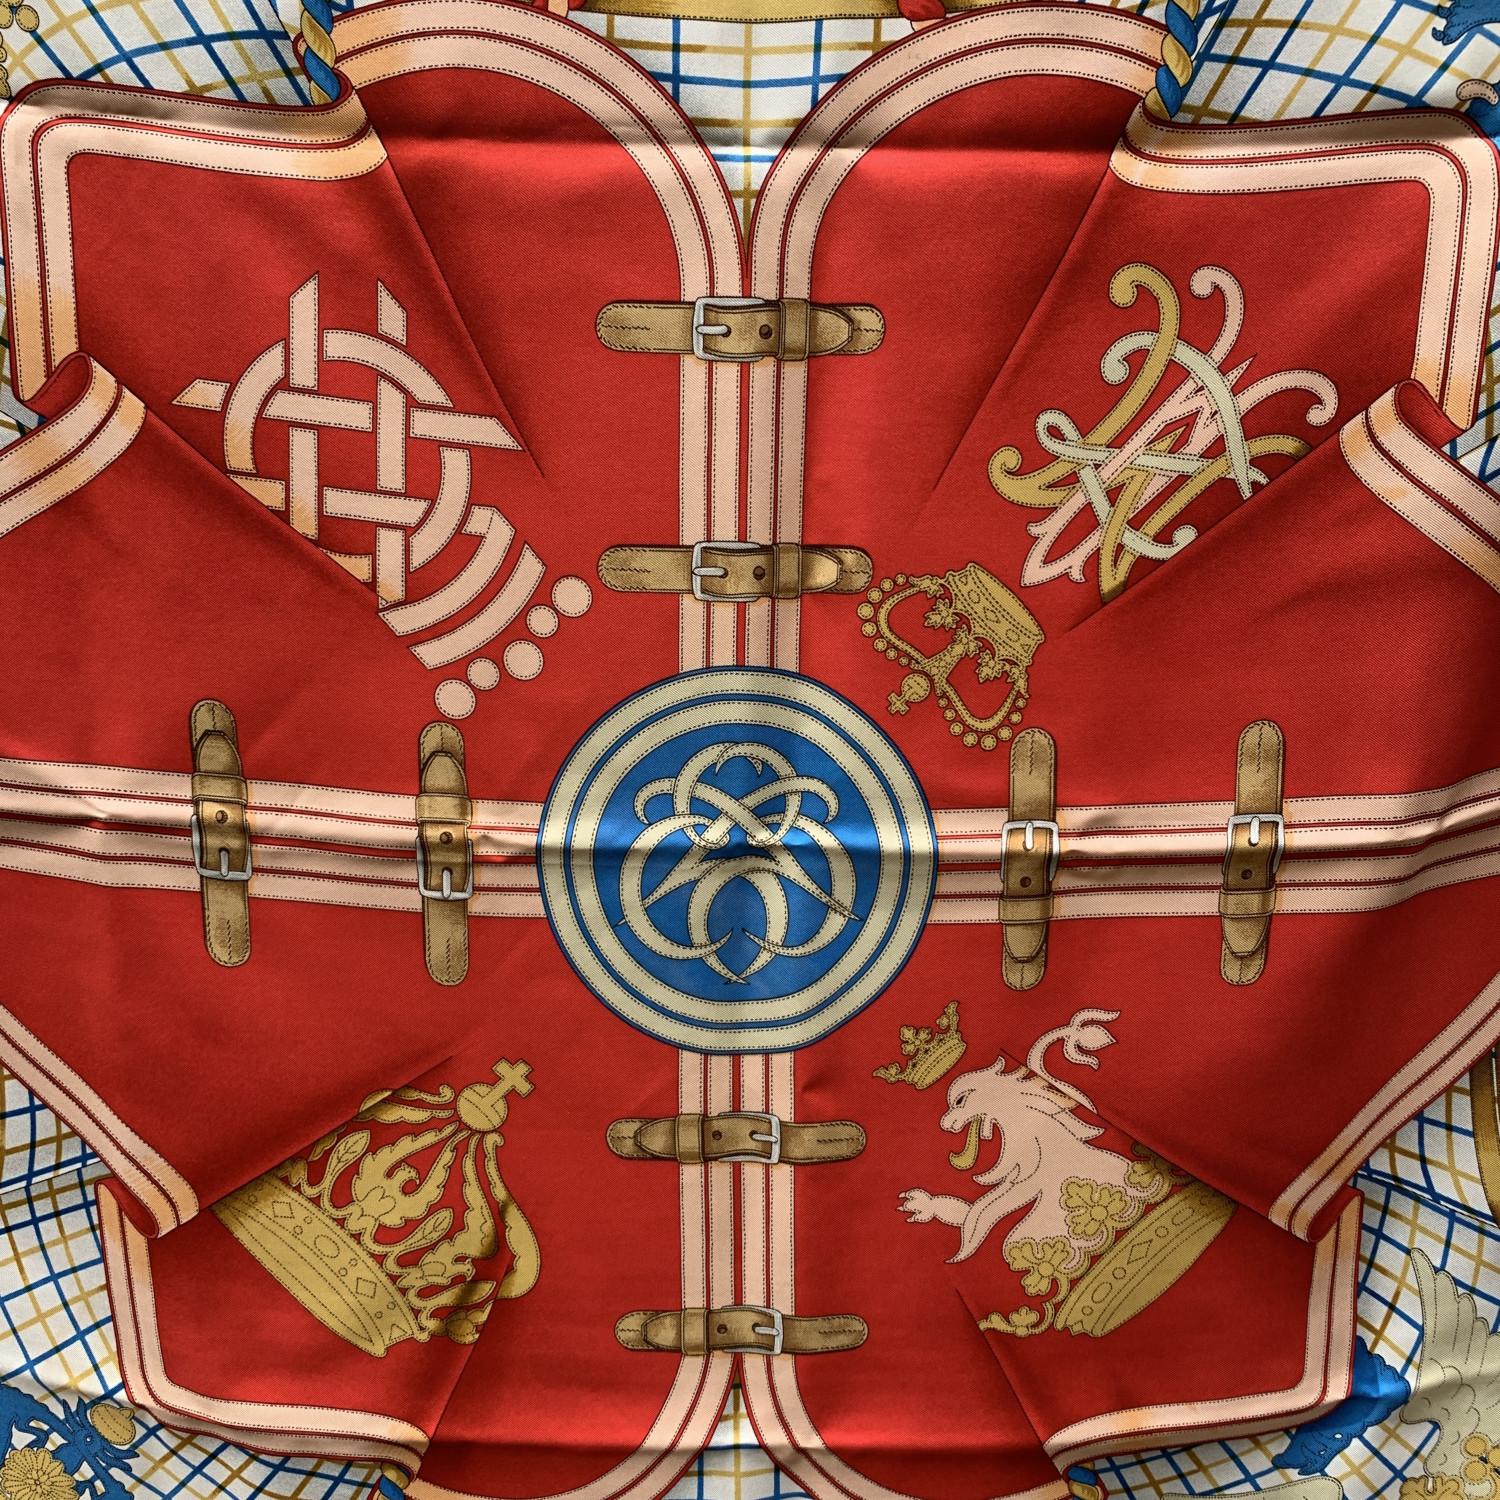 HERMES Silk scarf named 'Grande Tenue', designed by artist Henry D'Origny and issued for the first time in 1993. Black borders. 'Hermes Paris' and 'Hermes with copyright symbol printed on the scarf. Hermes composition tag is still attached. Approx.